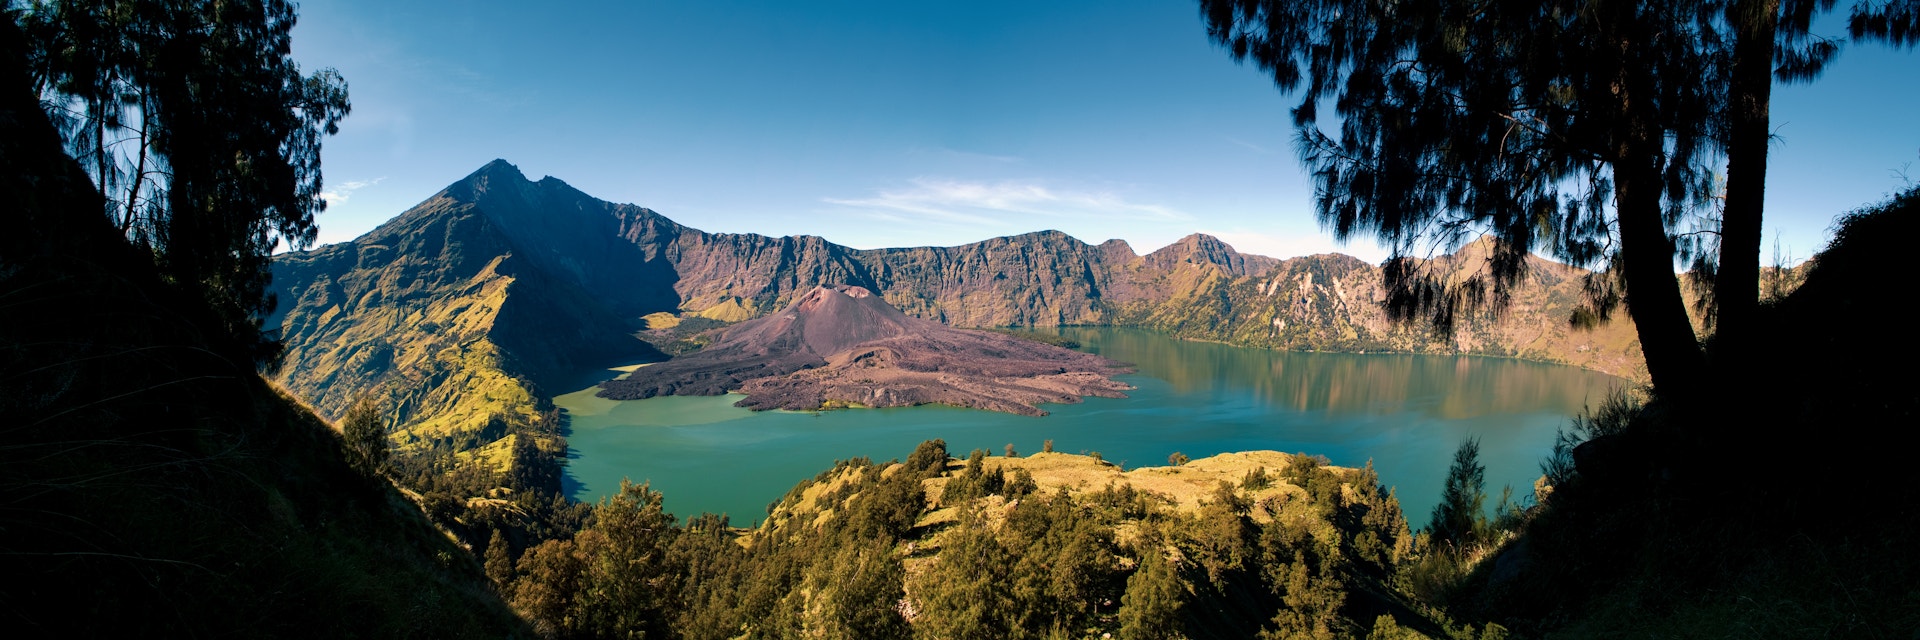 Indonesia Landscape Travel Photography Panoramic Photo of Mount Rinjani on Lombok the Second Highest Volcano in Indonesia Asia